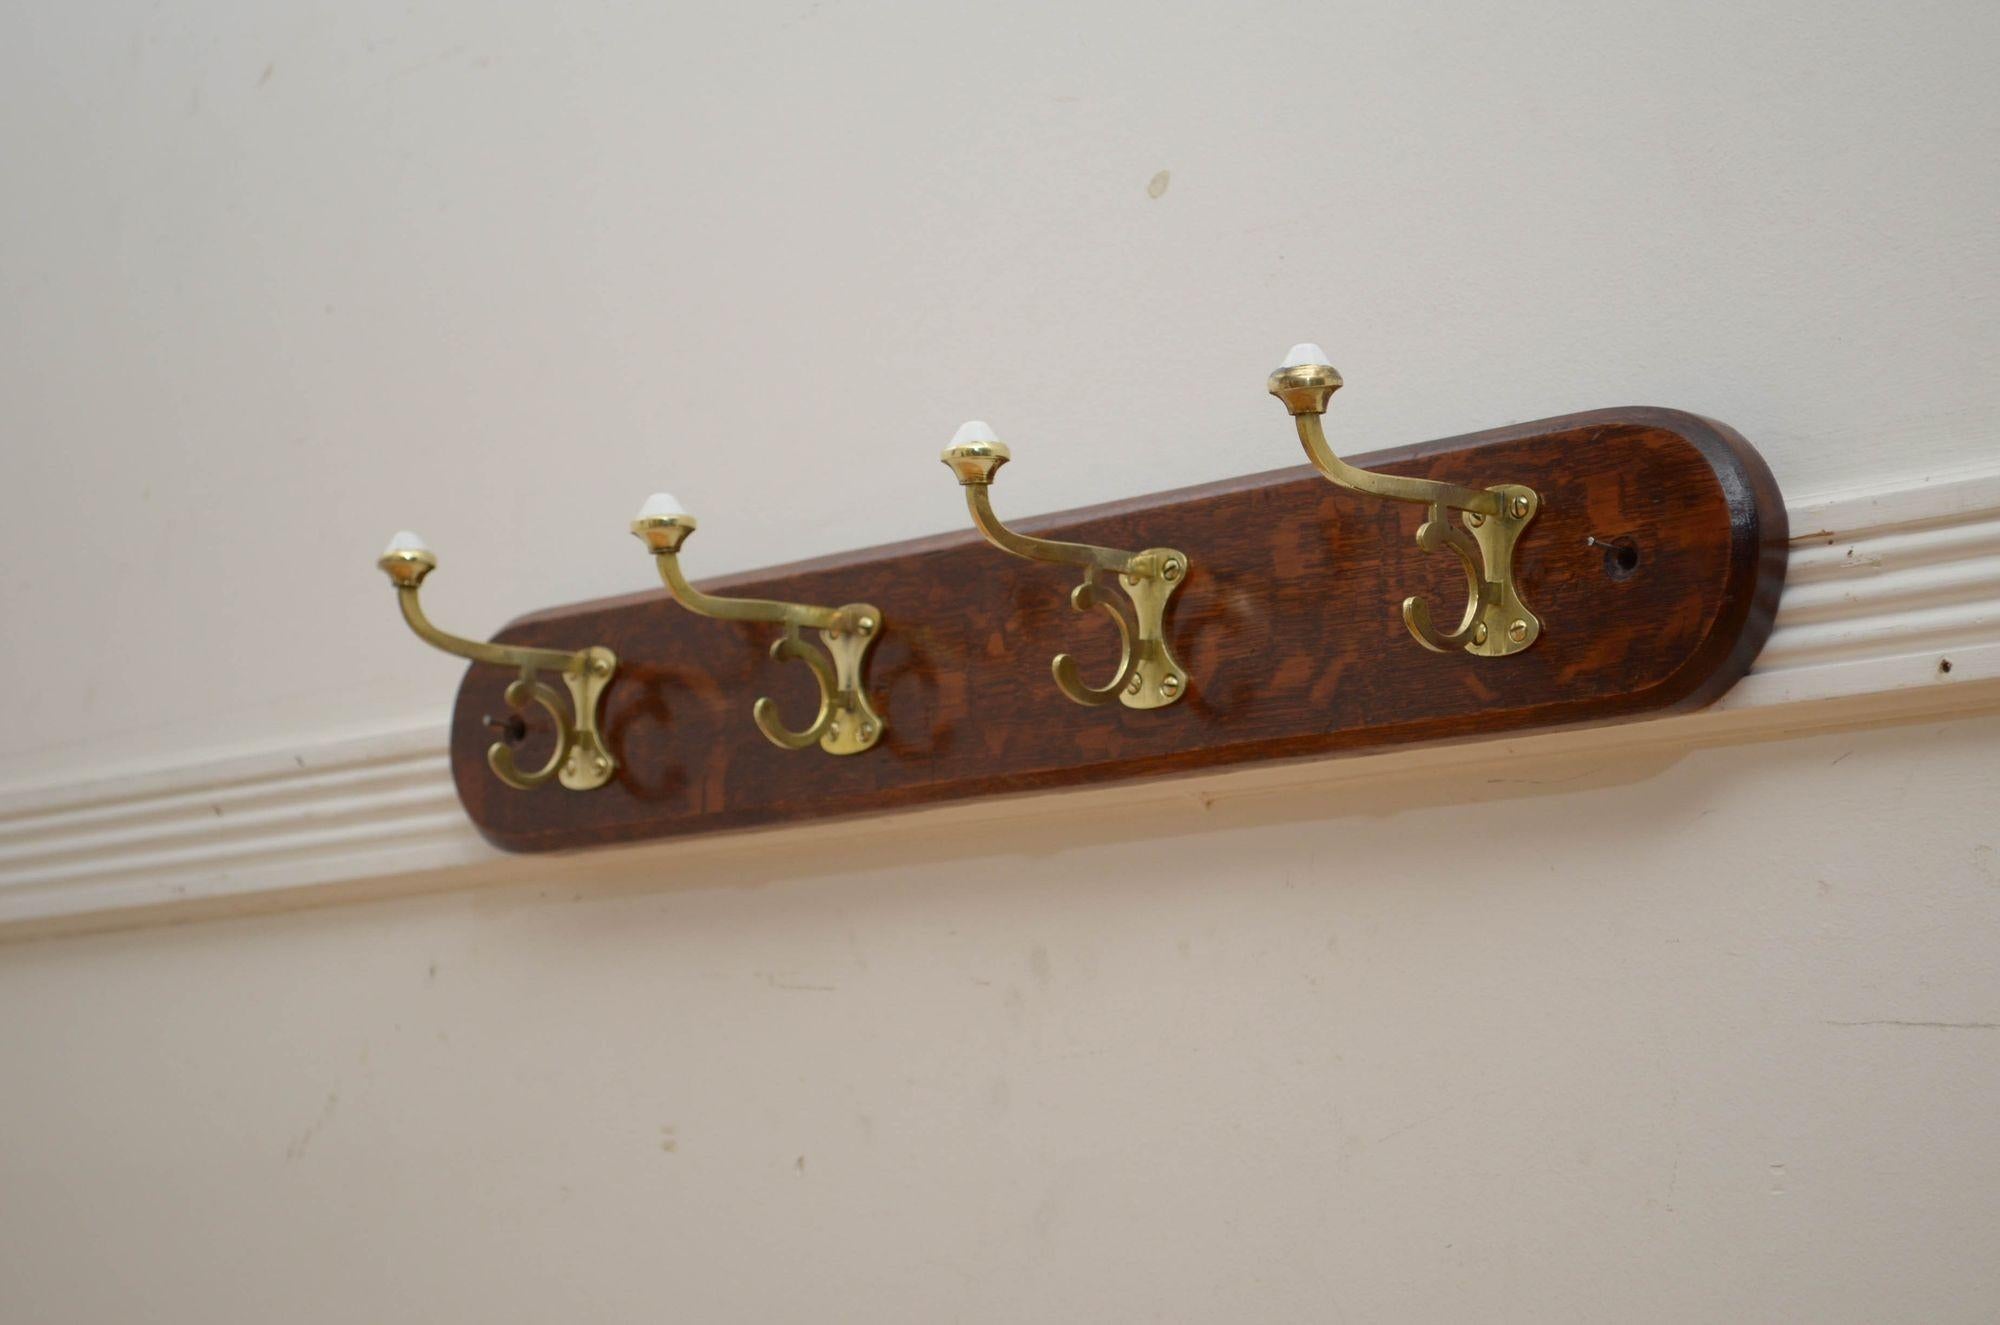 P0274 Elegant Victorian coat rack with four shaped brass and porcelain hooks on solid oak rounded back with chamfered edge and very decorative grain. This antique coat rack has been cleaned and polished and is in home ready condition. c1880
H4.5